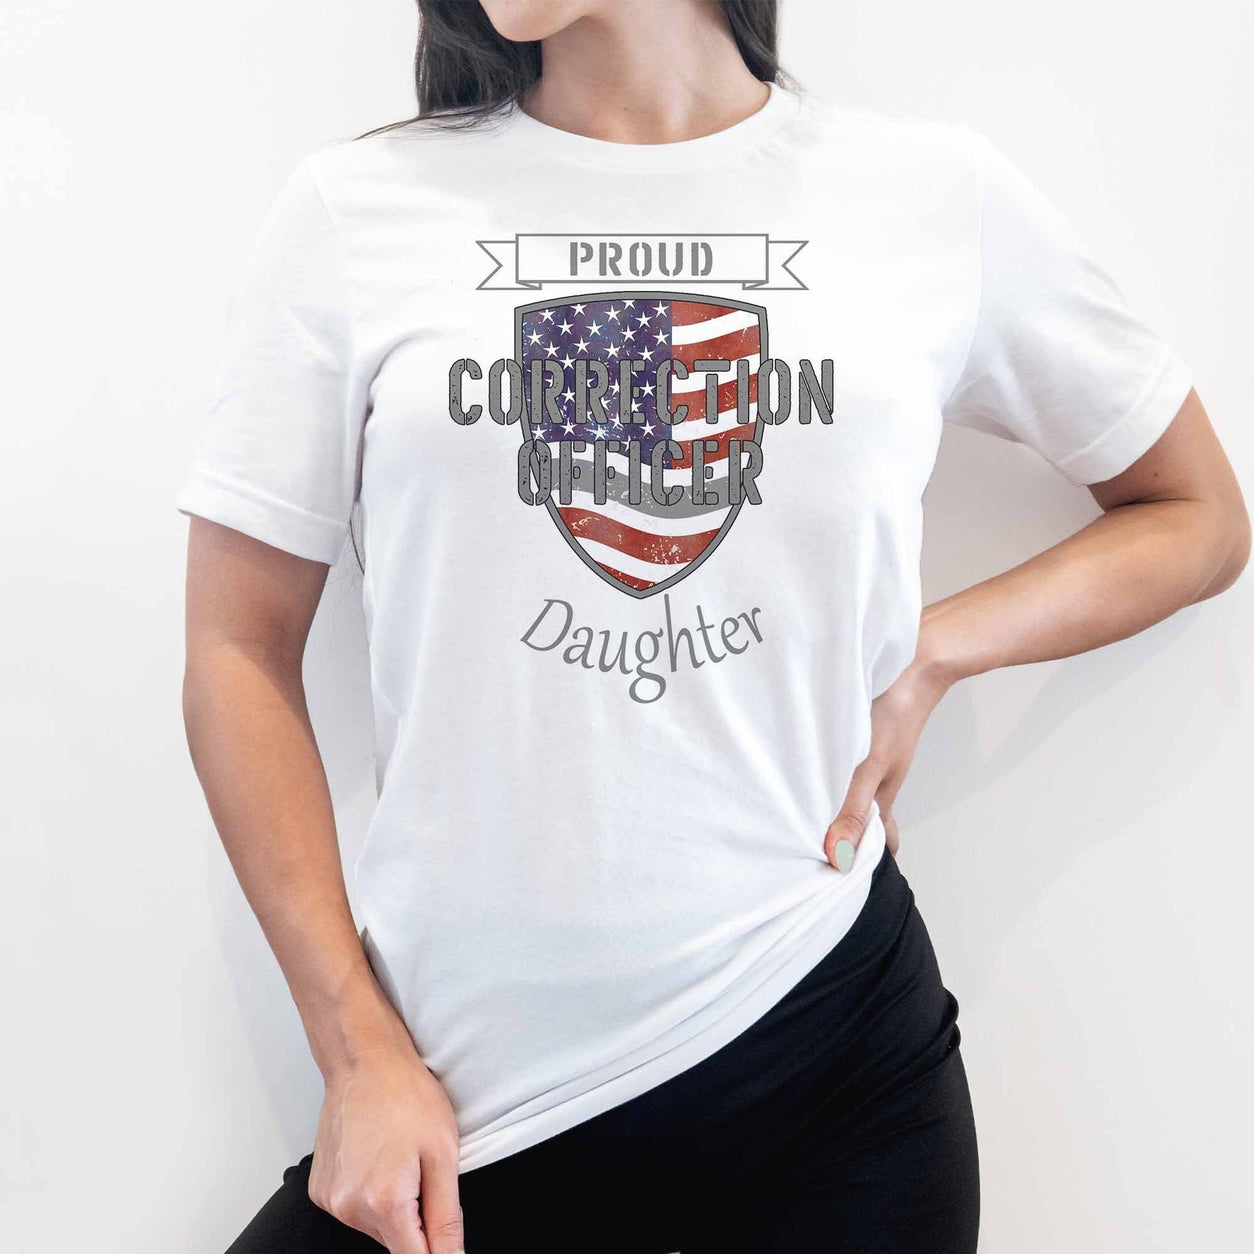 Proud Correction Officer Daughter - My Custom Tee Party